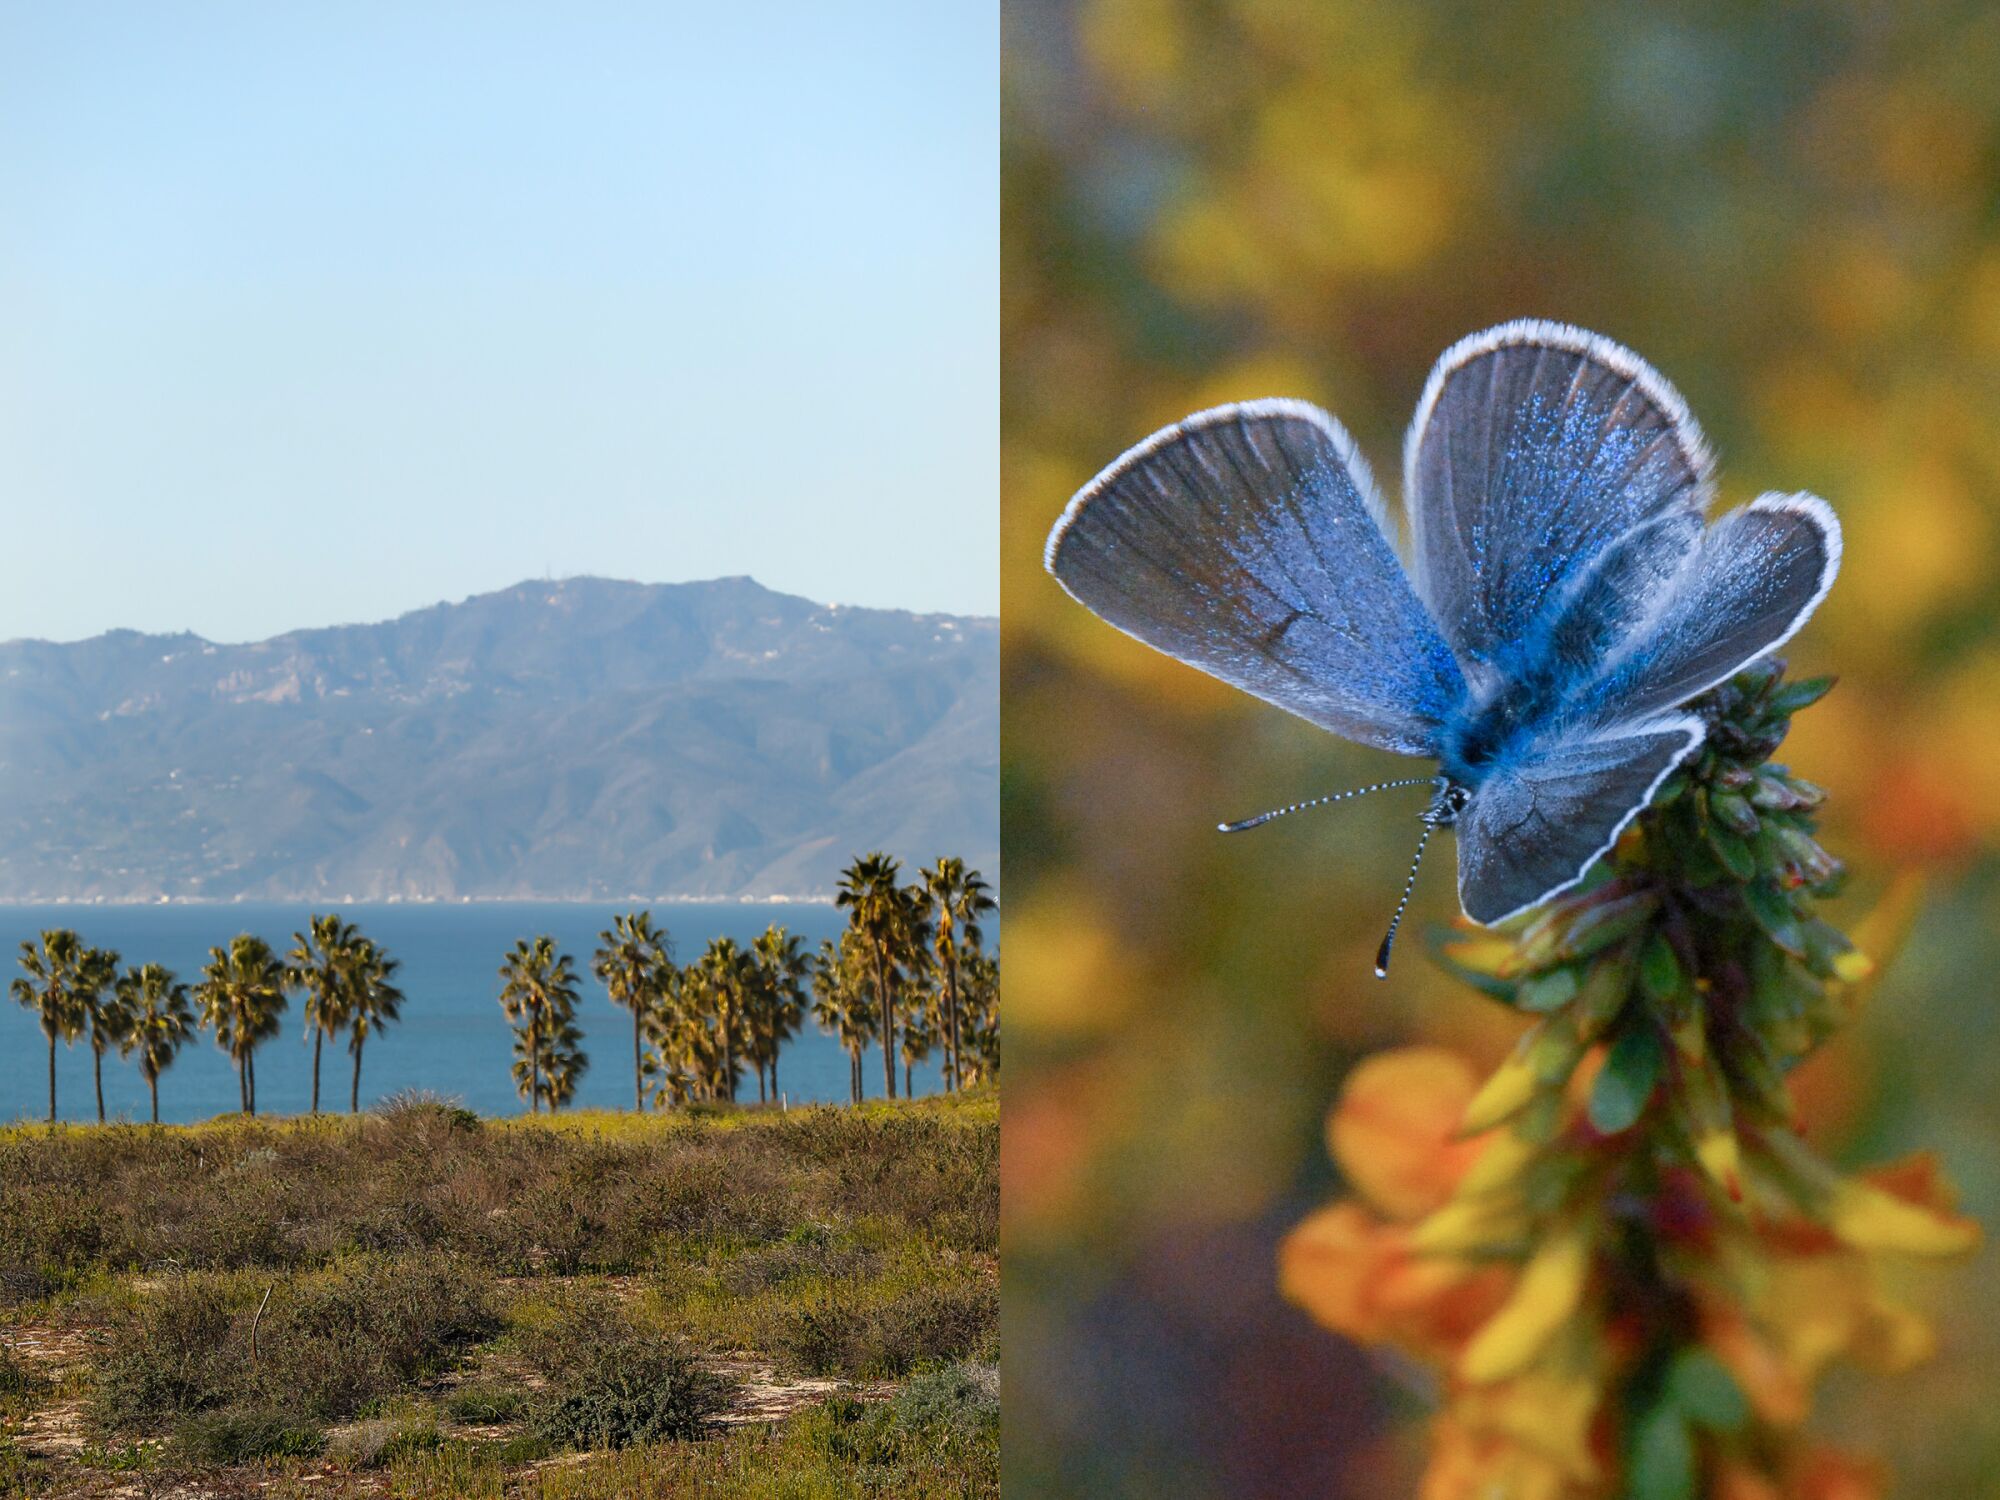 Two photos side by side, one of a landscape featuring green bushes, palm trees and ocean, and the other of a butterfly